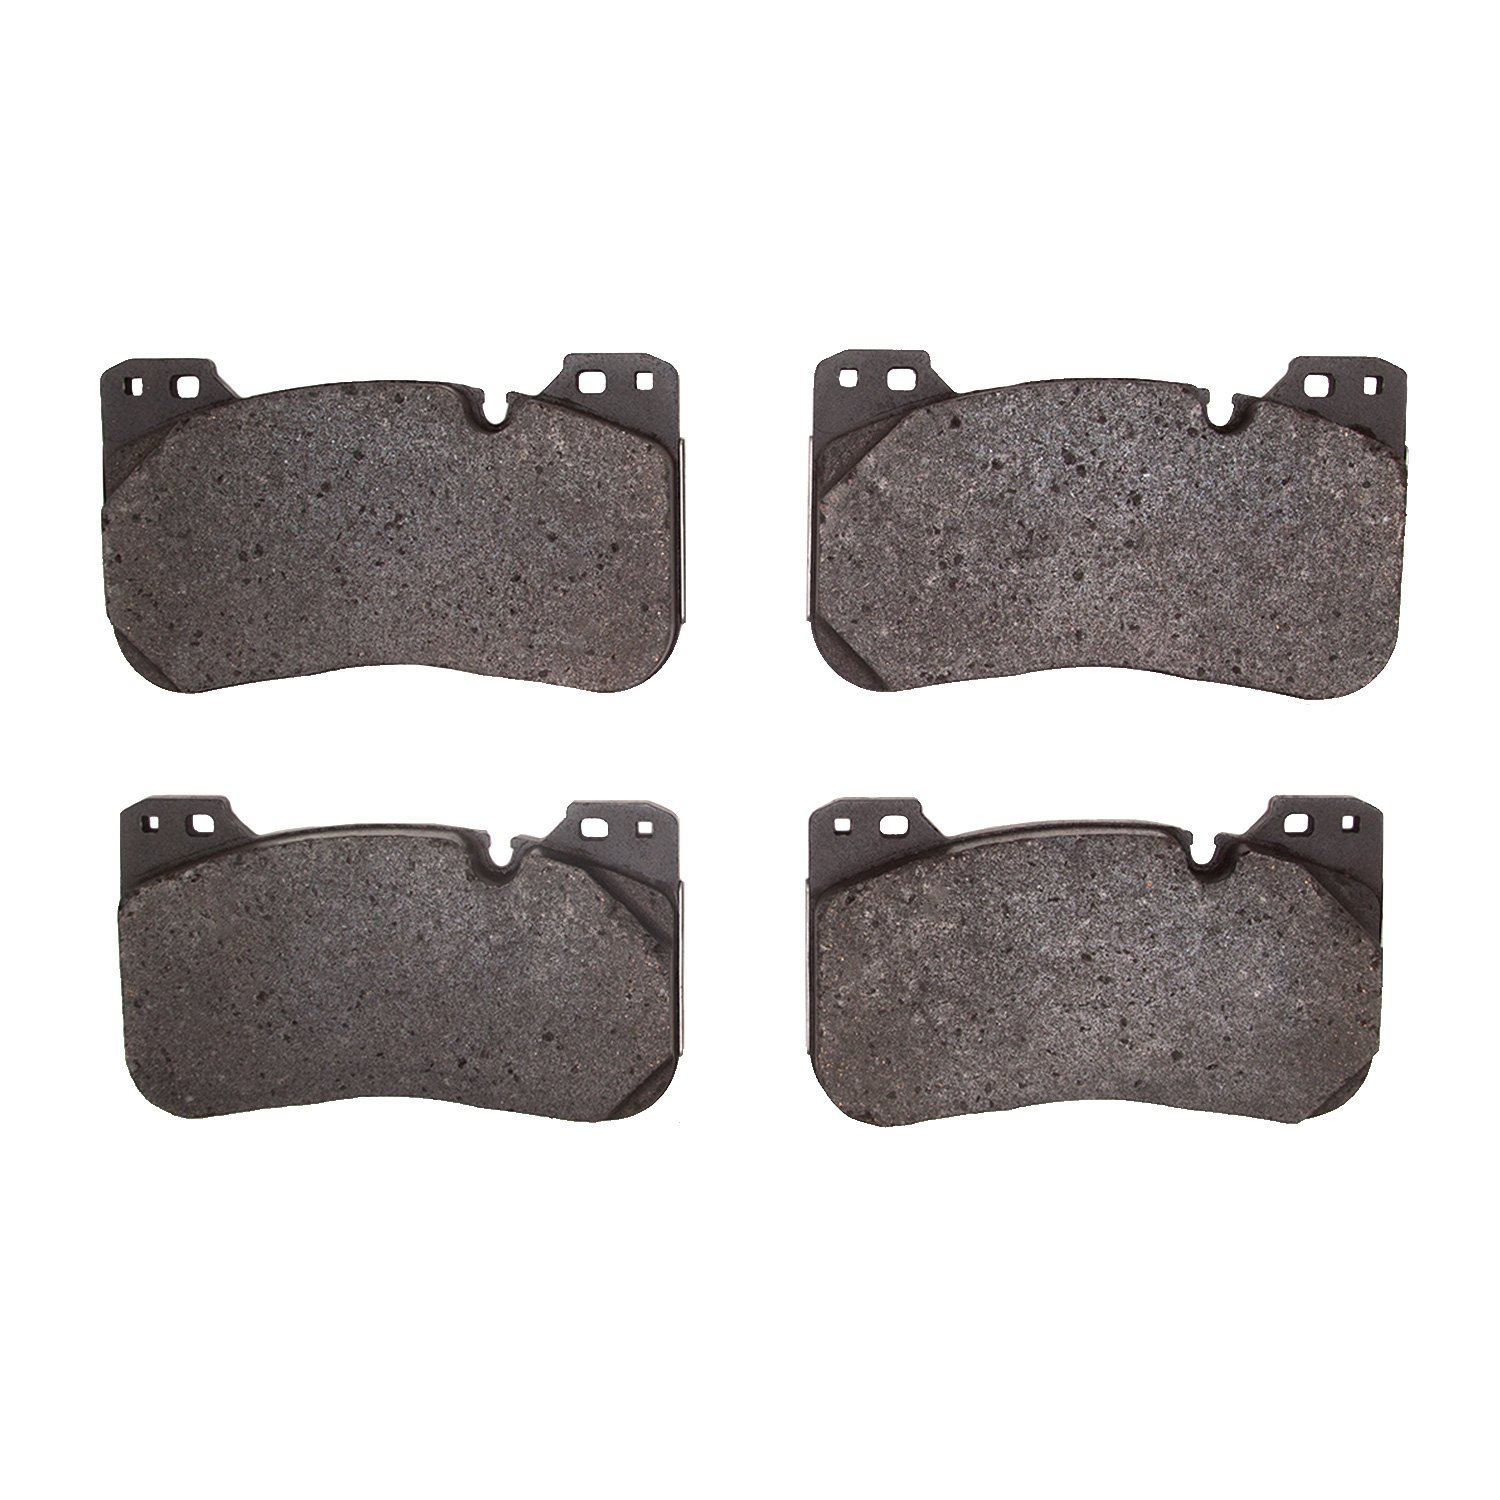 Ceramic Brake Pads, Fits Select BMW, Position: Front